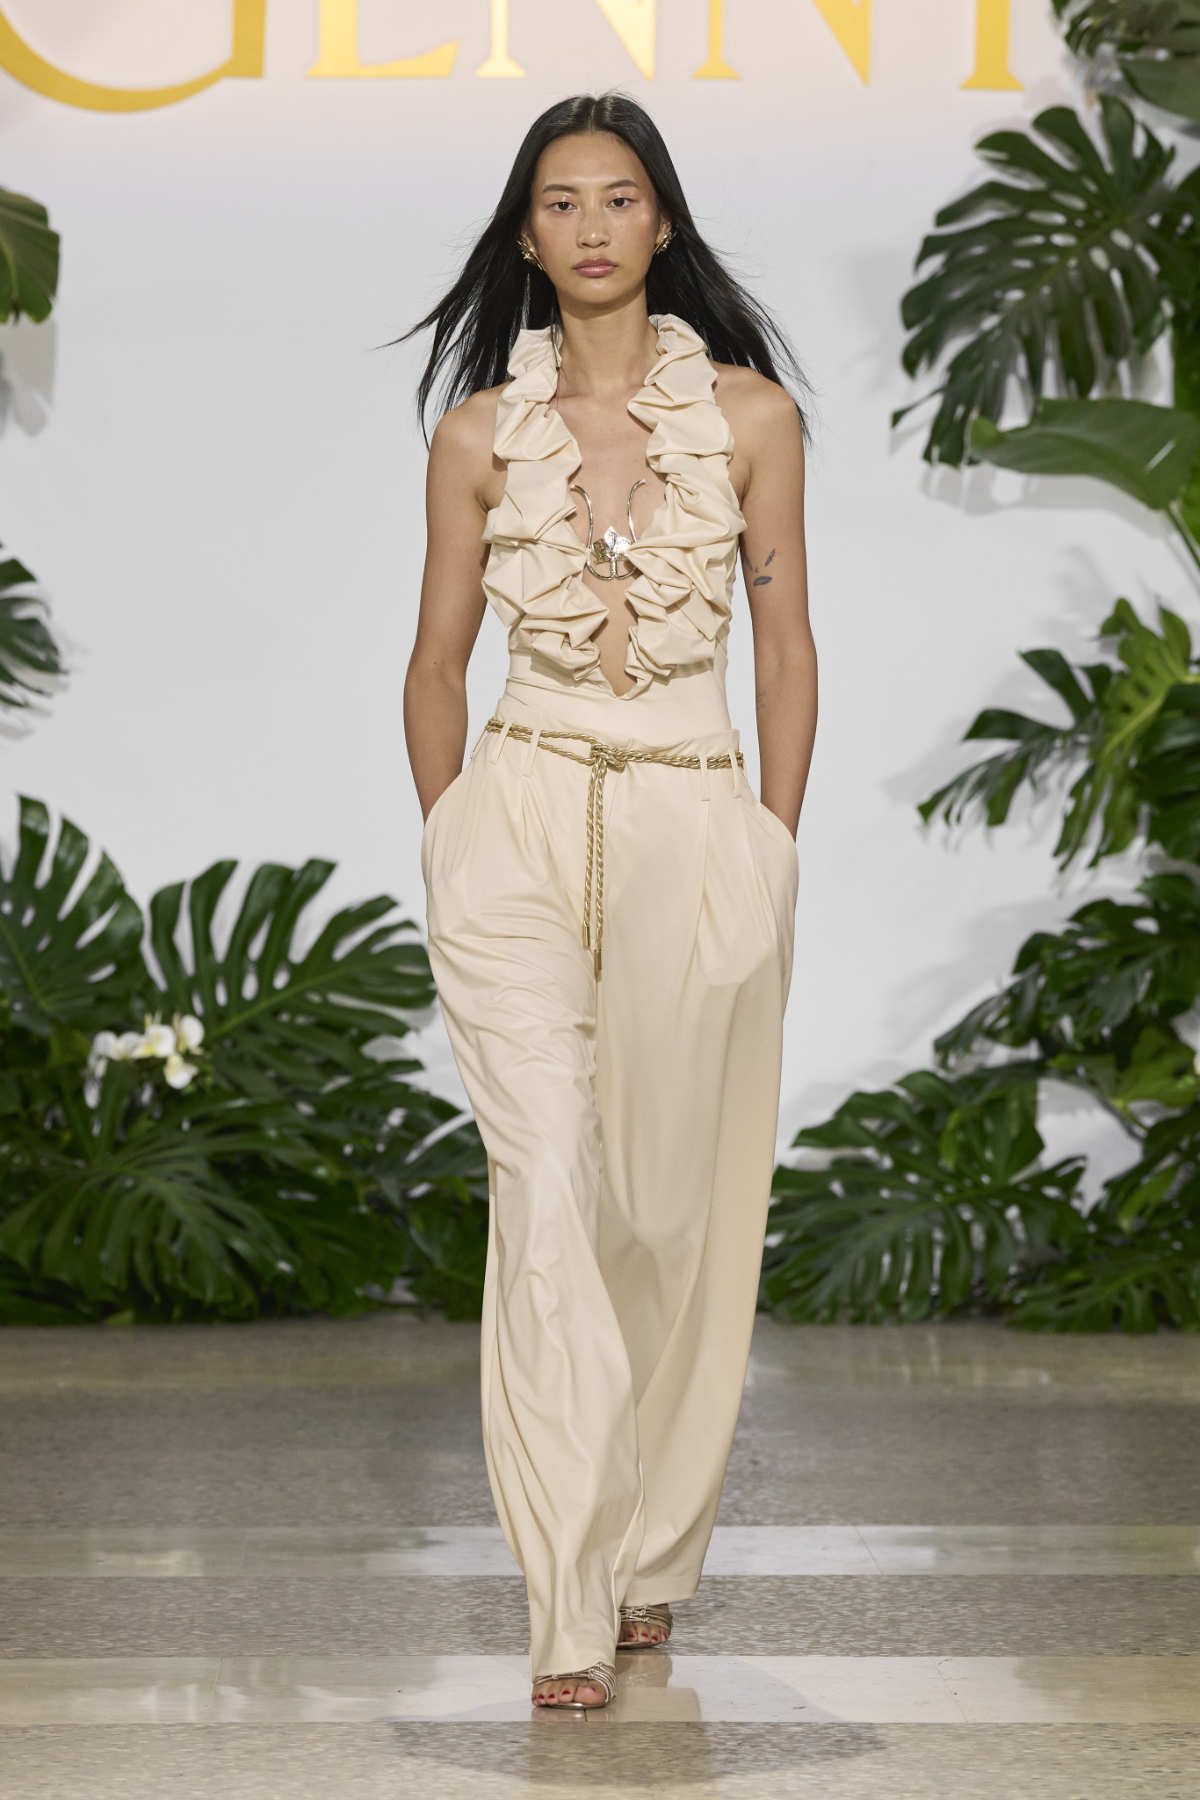 Genny Presents Its New Spring-Summer 2024 Collection: The Orchid Garden